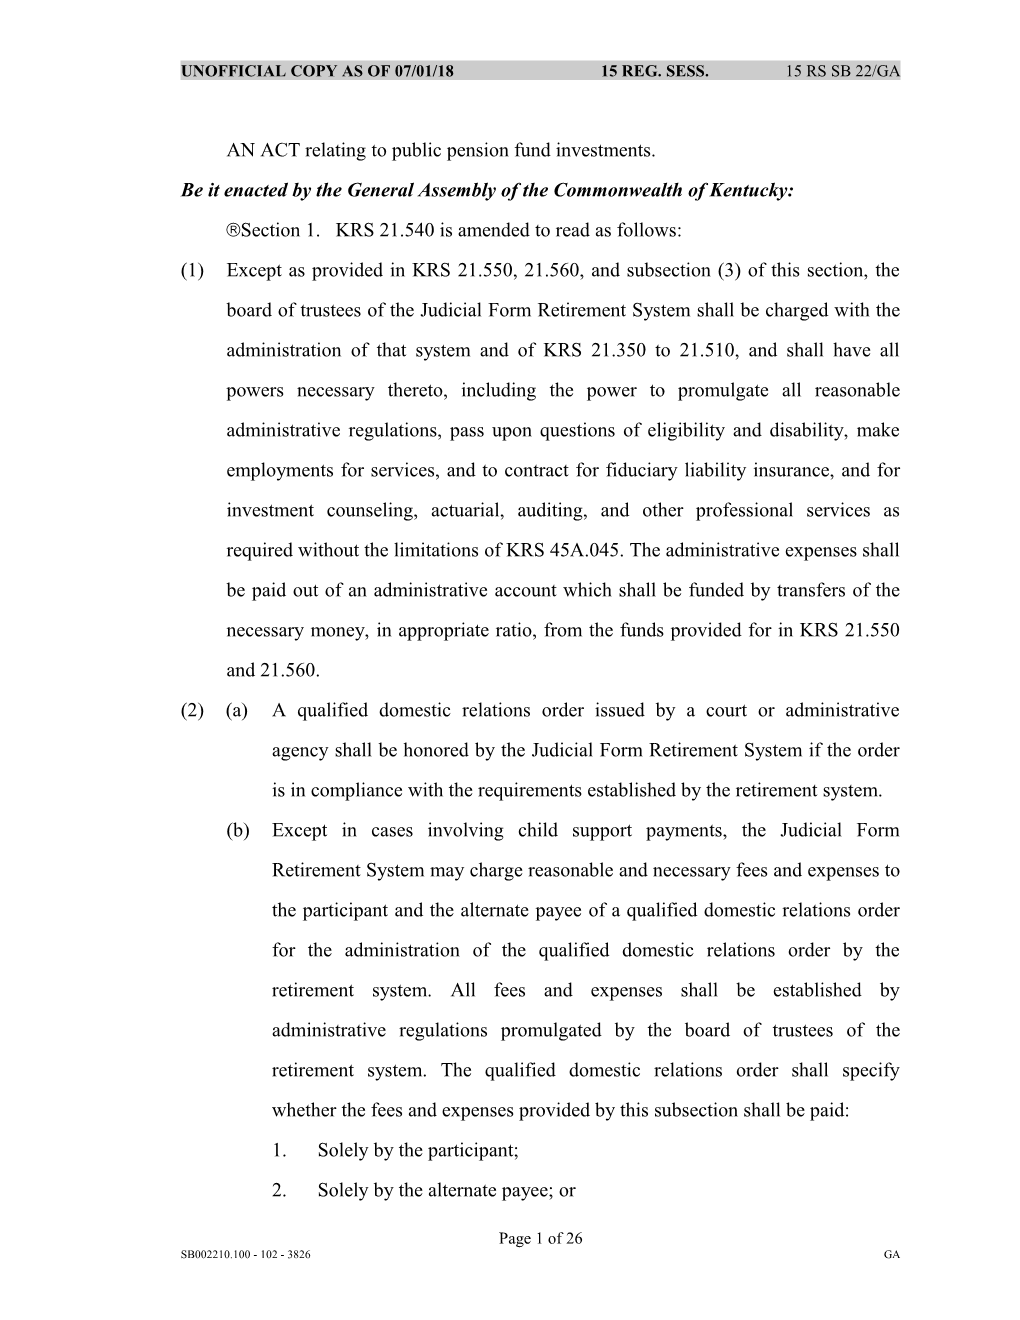 AN ACT Relating to Public Pension Fund Investments